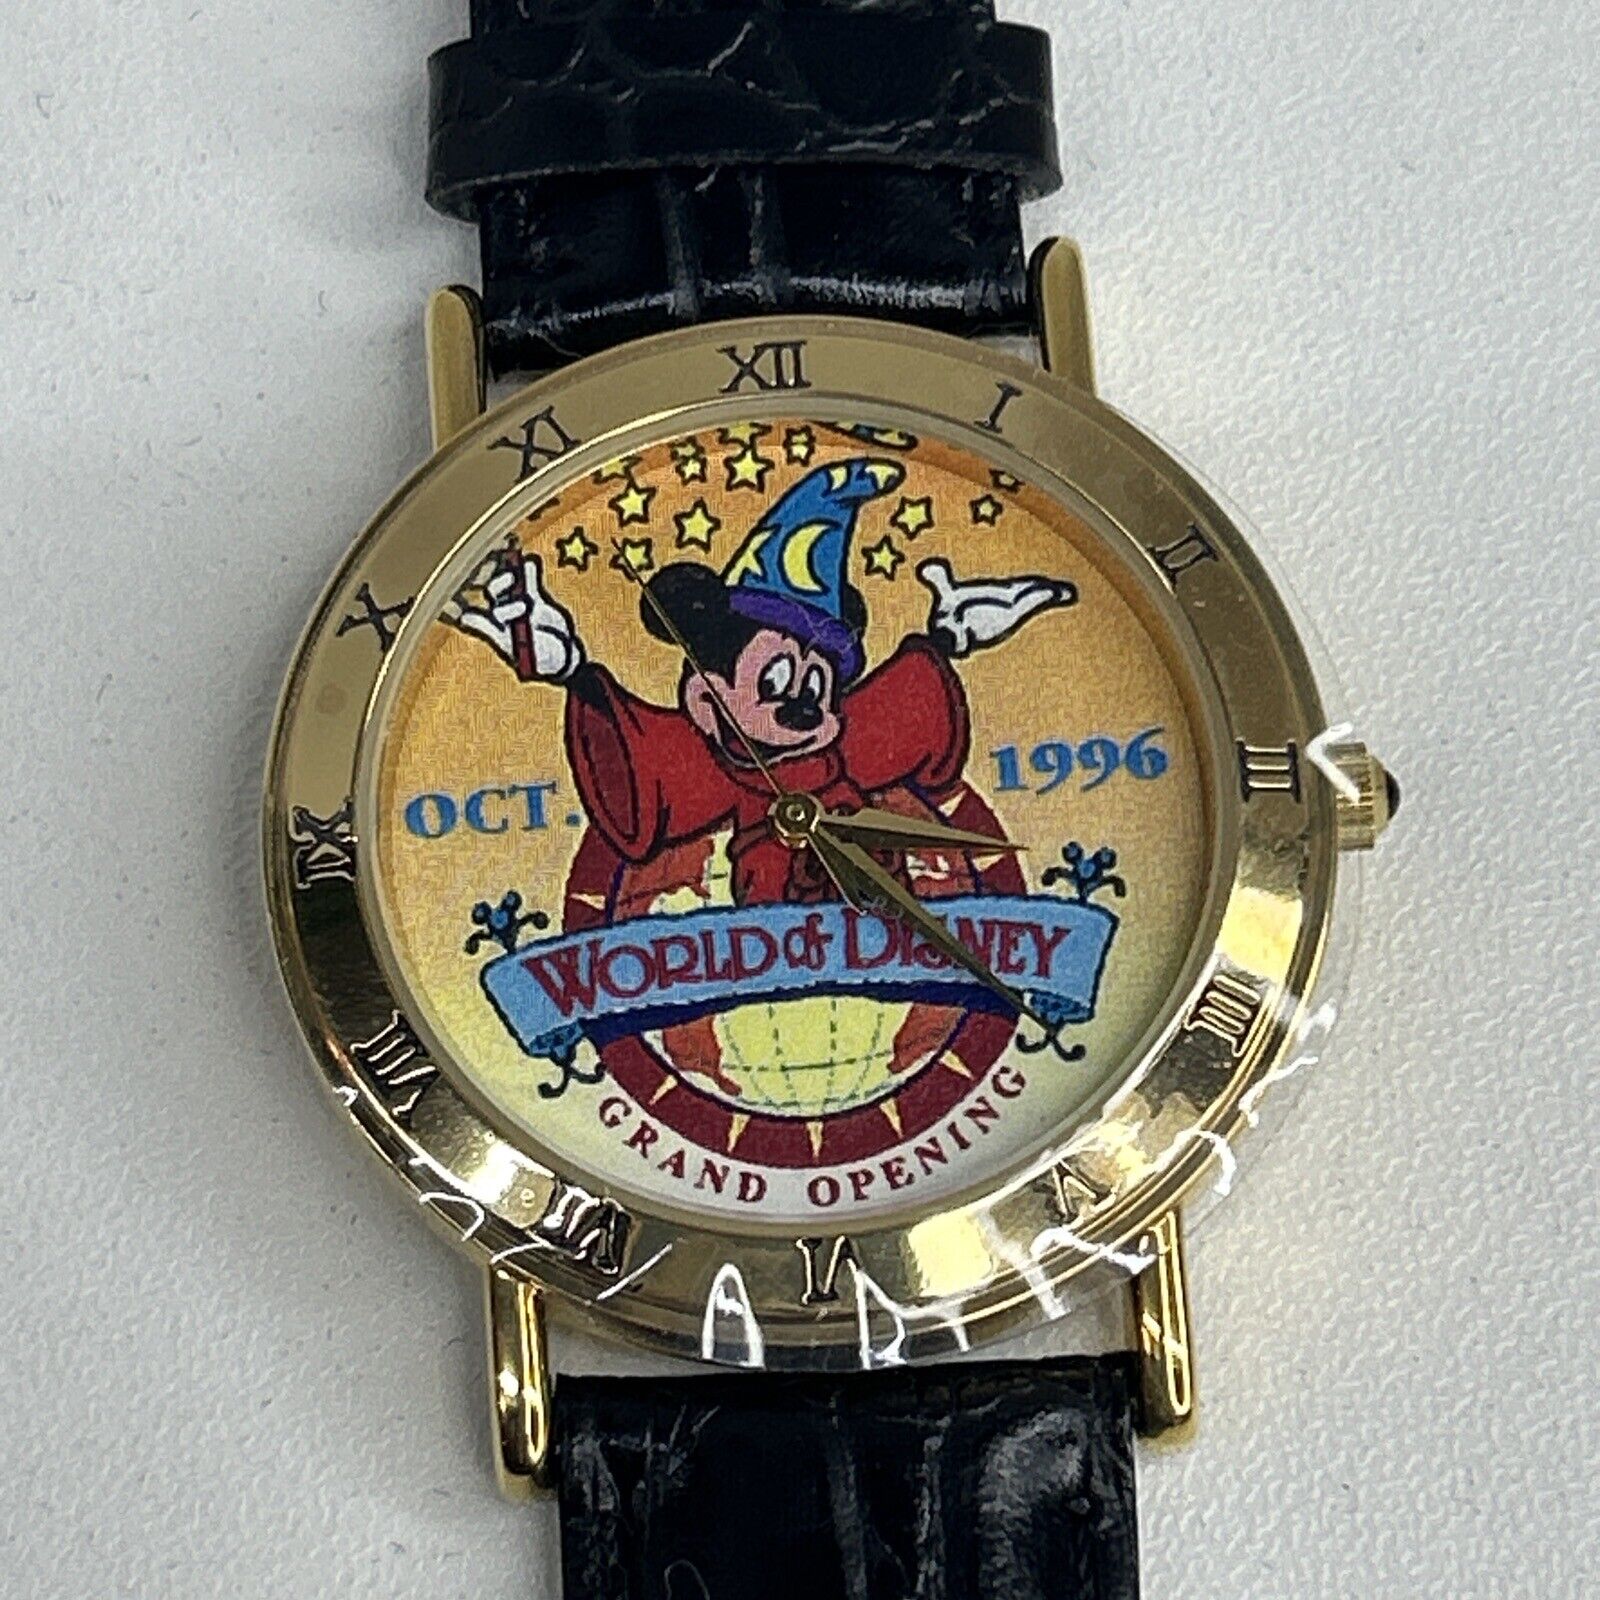 October 1996 World Of Disney Grand Opening Watch Leather Band Rare NEEDS BATTERY